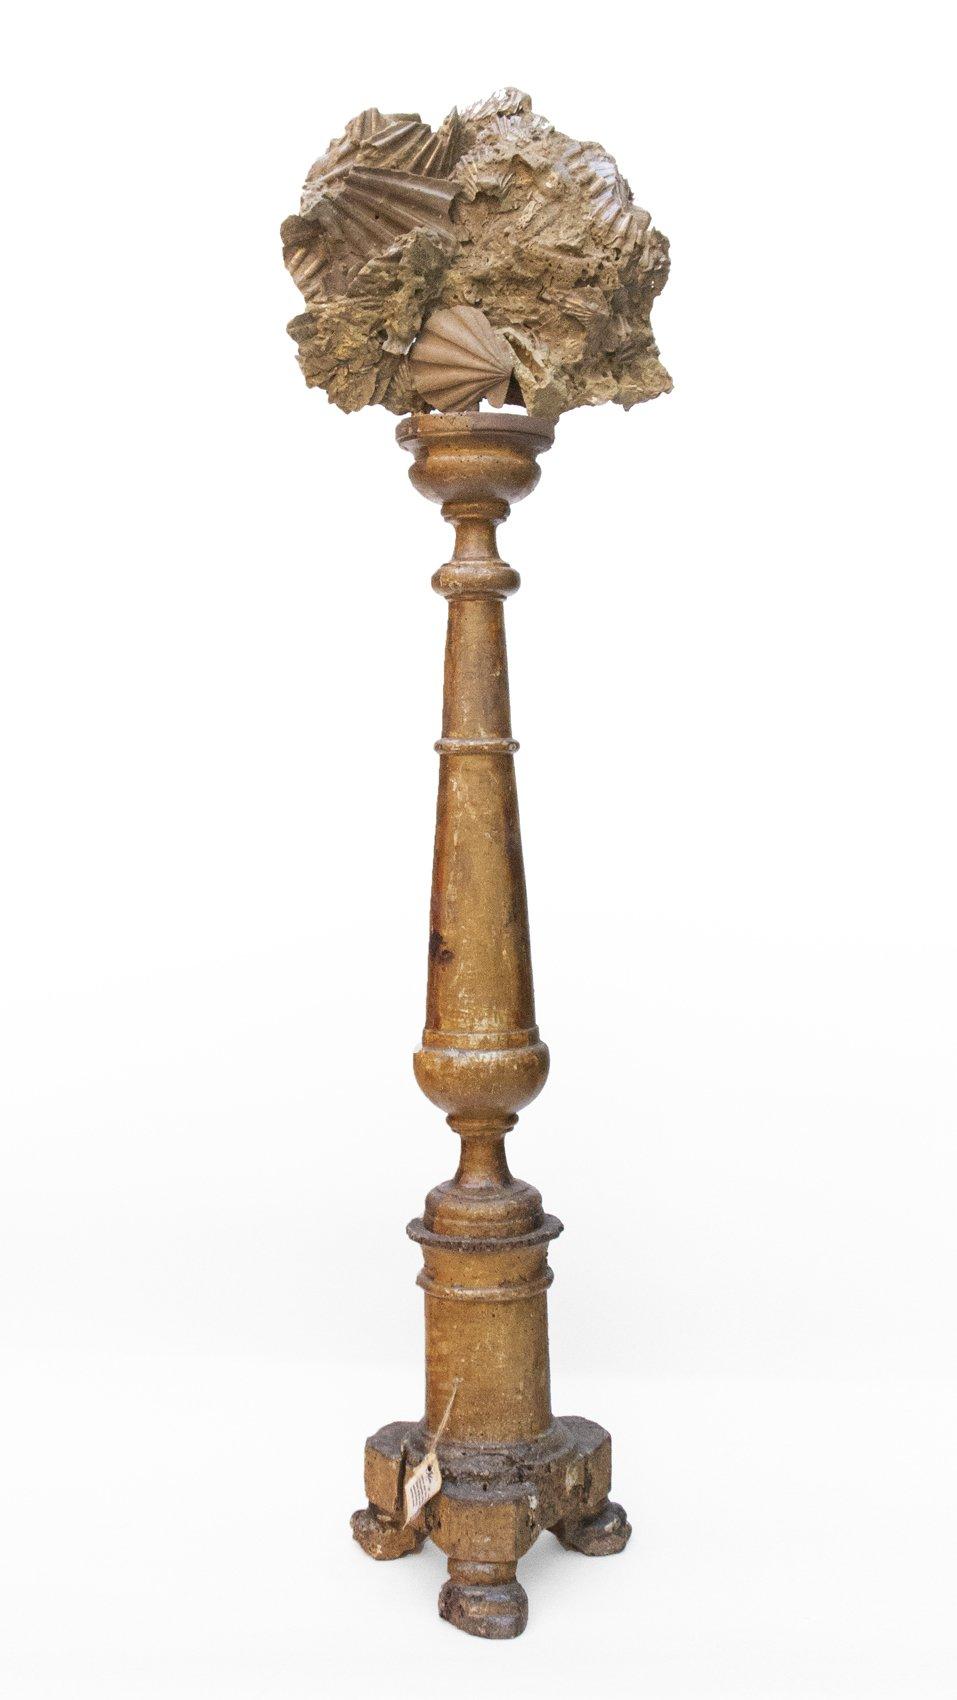 Hand-Carved 18th Century Italian Altar Stick with a Chesapecten Fossil Shell and Pearls  For Sale